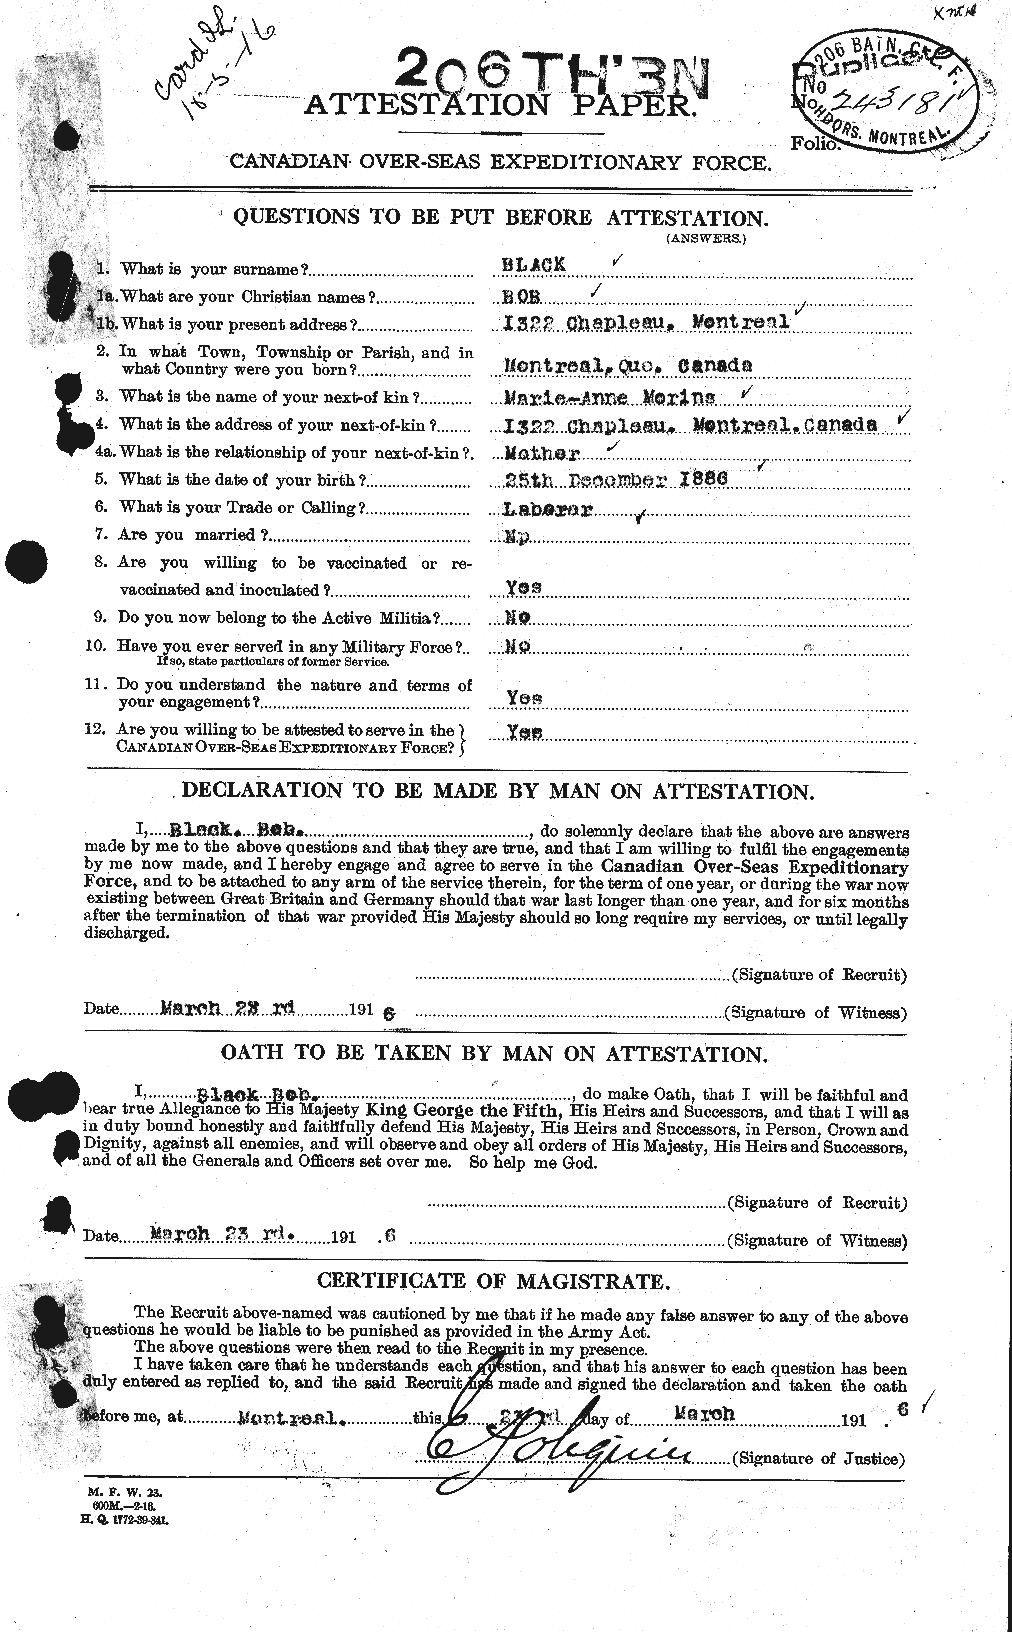 Personnel Records of the First World War - CEF 241229a